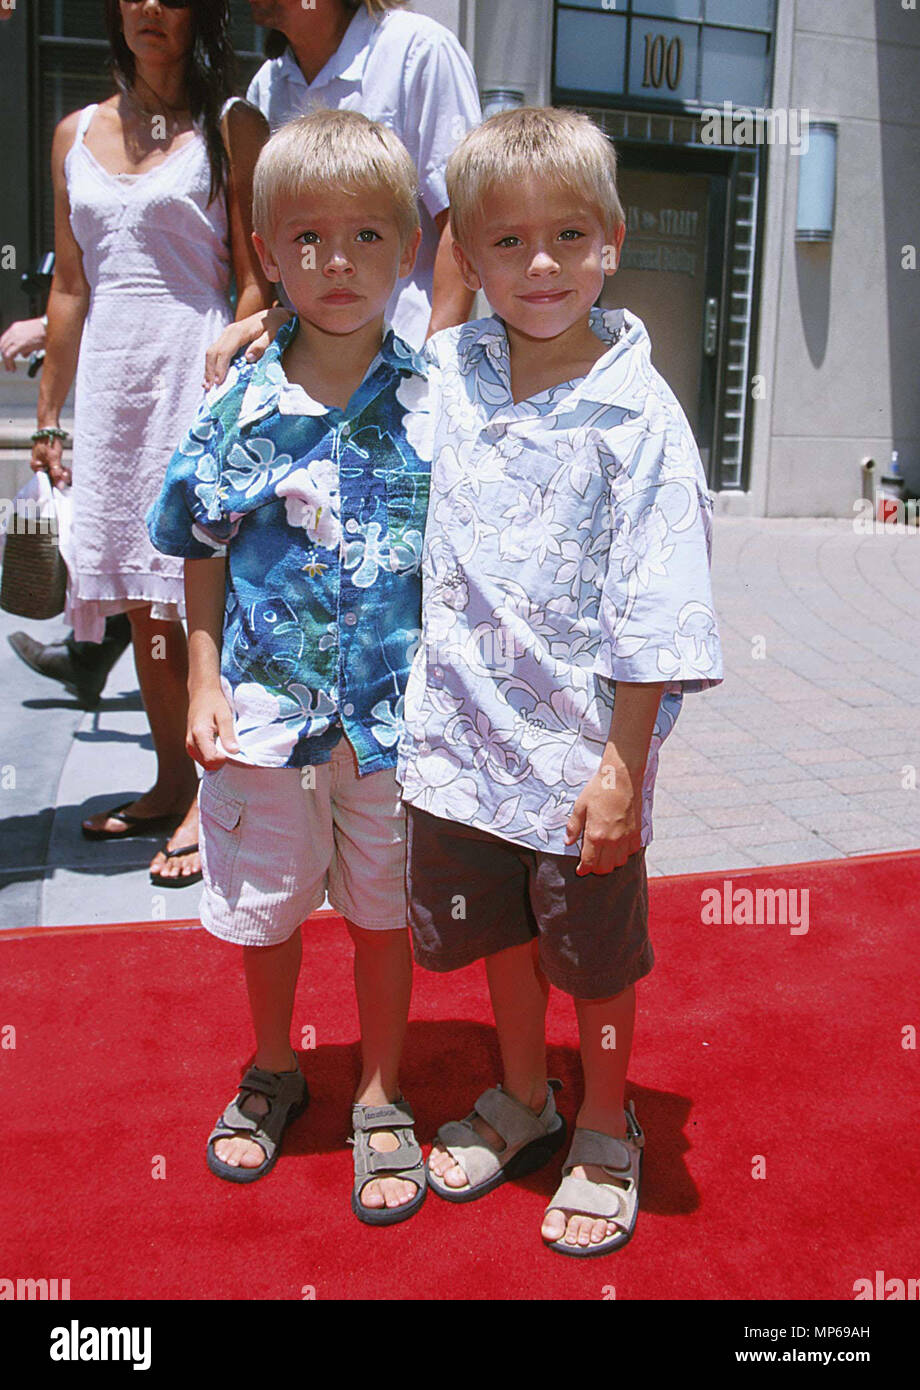 Sprouse Cole & DylanSprouse, Cole & Dylan(BigDaddy)  Event in Hollywood Life - California, Red Carpet Event, USA, Film Industry, Celebrities, Photography, Bestof, Arts Culture and Entertainment, Topix Celebrities fashion, Best of, Hollywood Life, Event in Hollywood Life - California, Red Carpet and backstage, movie celebrities, TV celebrities, Music celebrities, Topix, Bestof, Arts Culture and Entertainment, vertical, one person, Photography,   Three Quarters, 1993 to 1999, inquiry tsuni@Gamma-USA.com , Credit Tsuni / USA,   === Red Carpet Event, USA, Film Industry, Celebrities, Photography, A Stock Photo